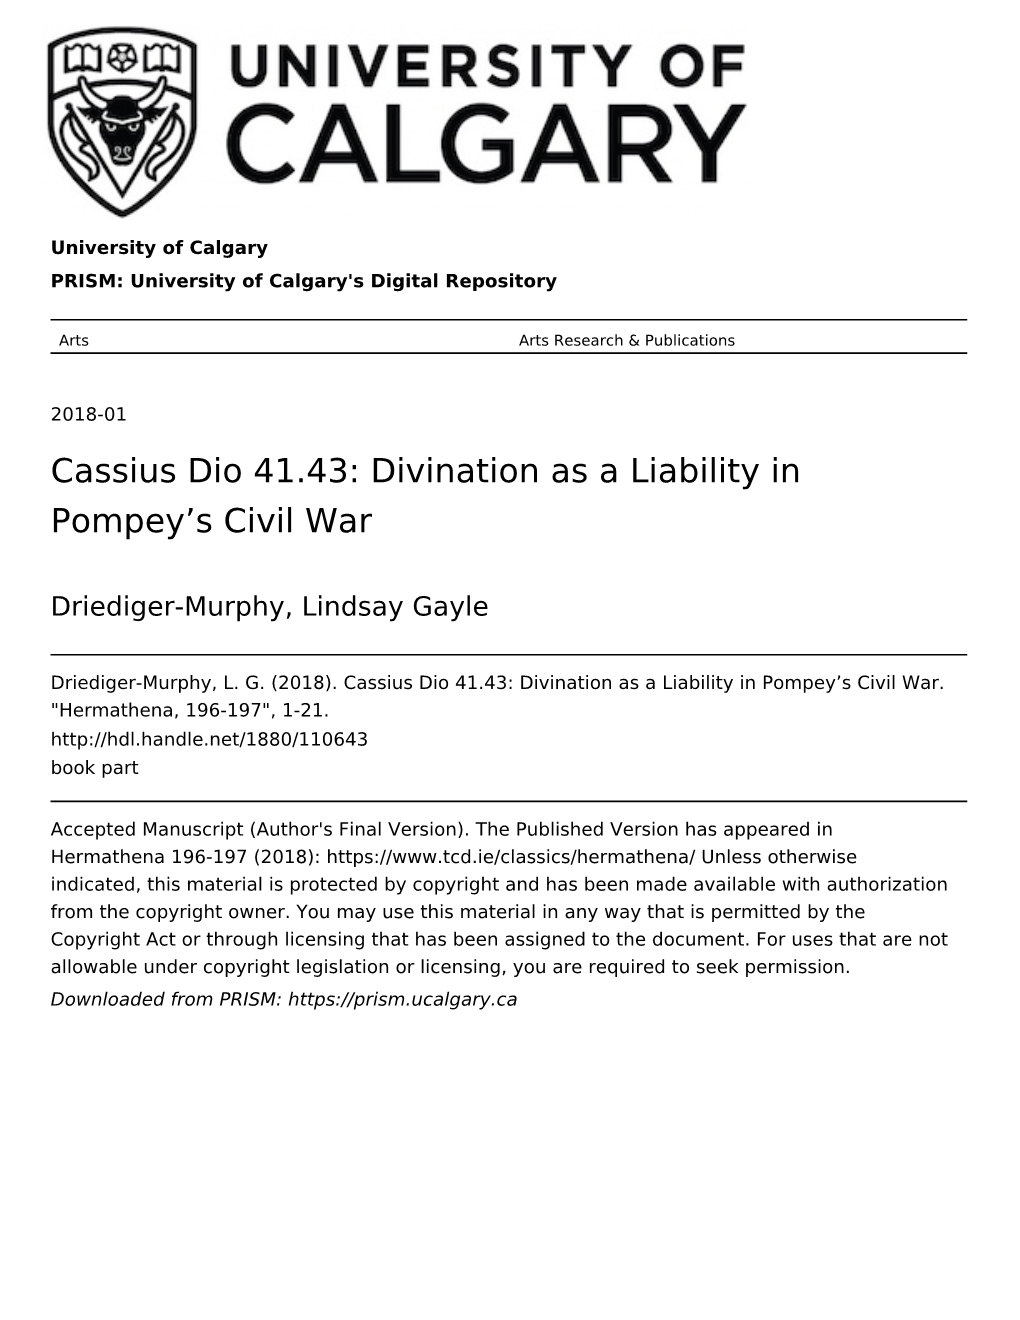 Cassius Dio 41.43: Divination As a Liability in Pompey’S Civil War